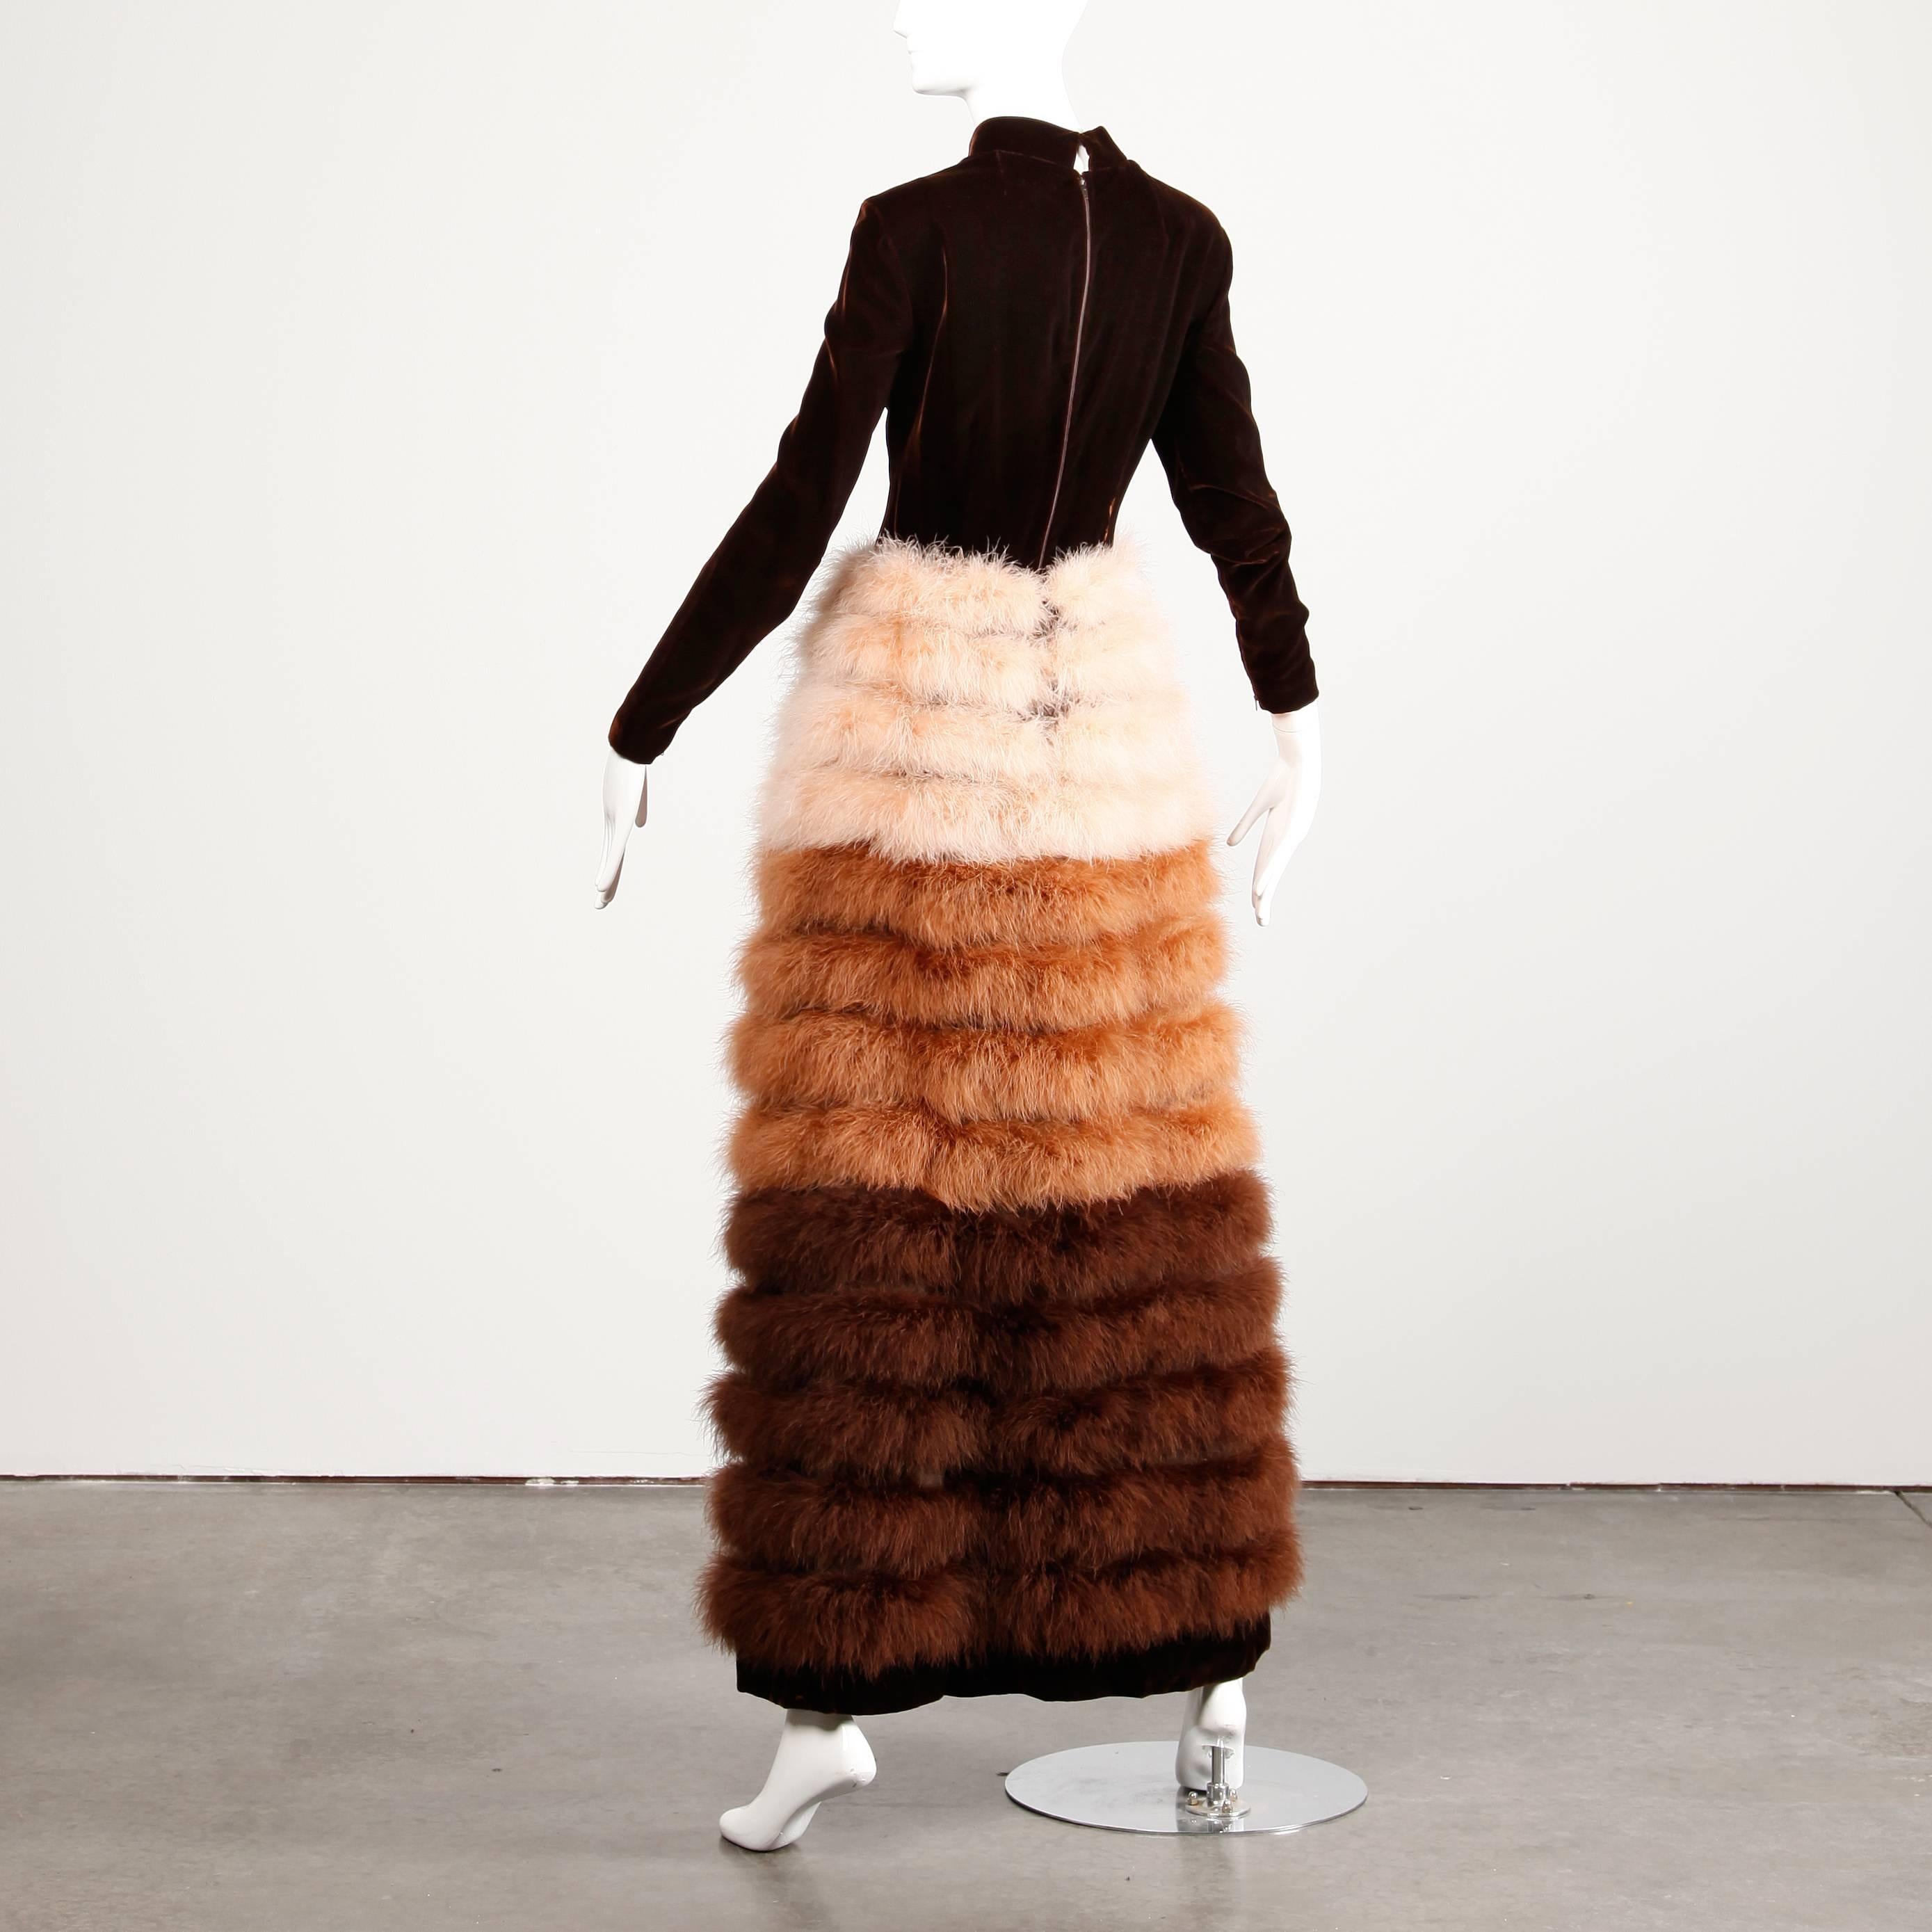 Museum-quality iconic vintage 1960s brown velvet gown with brown, tan and pink marabou feathers by Geoffrey Beene. Long sleeves with zip detail at the wrists and huge voluminous feather skirt. 

This dress is missing the label but it is a well